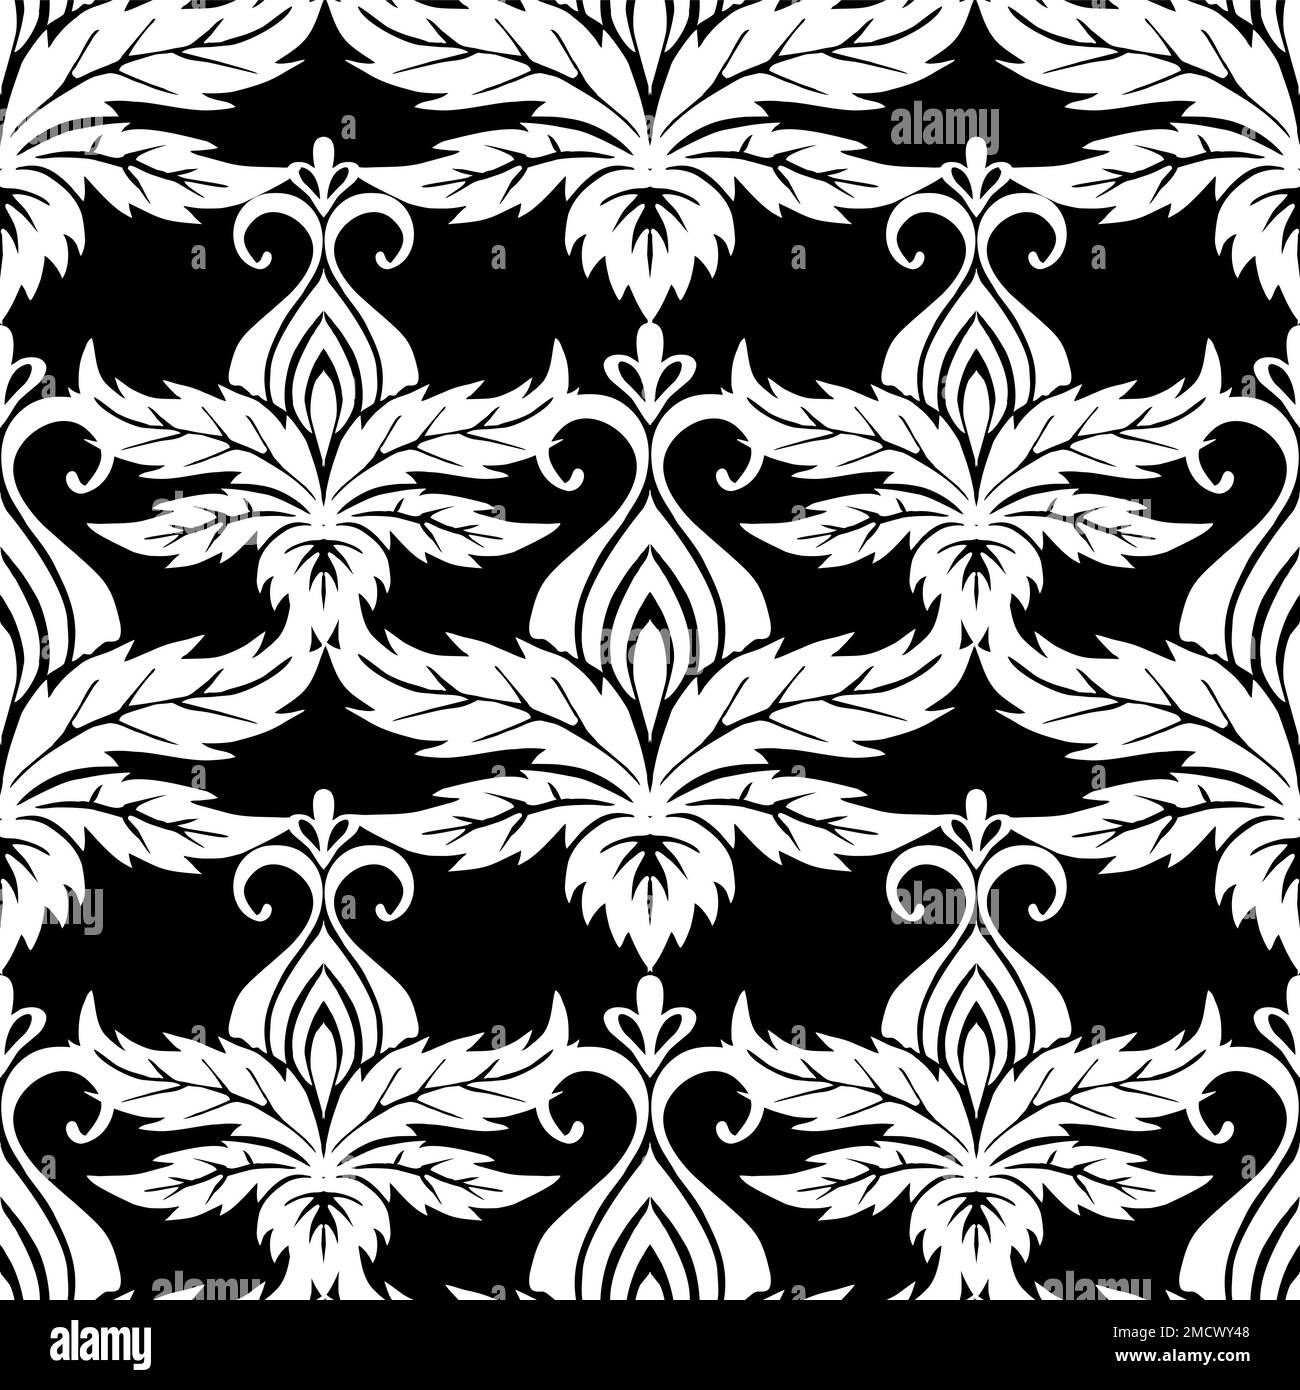 seamless symmetrical pattern of abstract white plant elements on a black background, texture, design Stock Photo